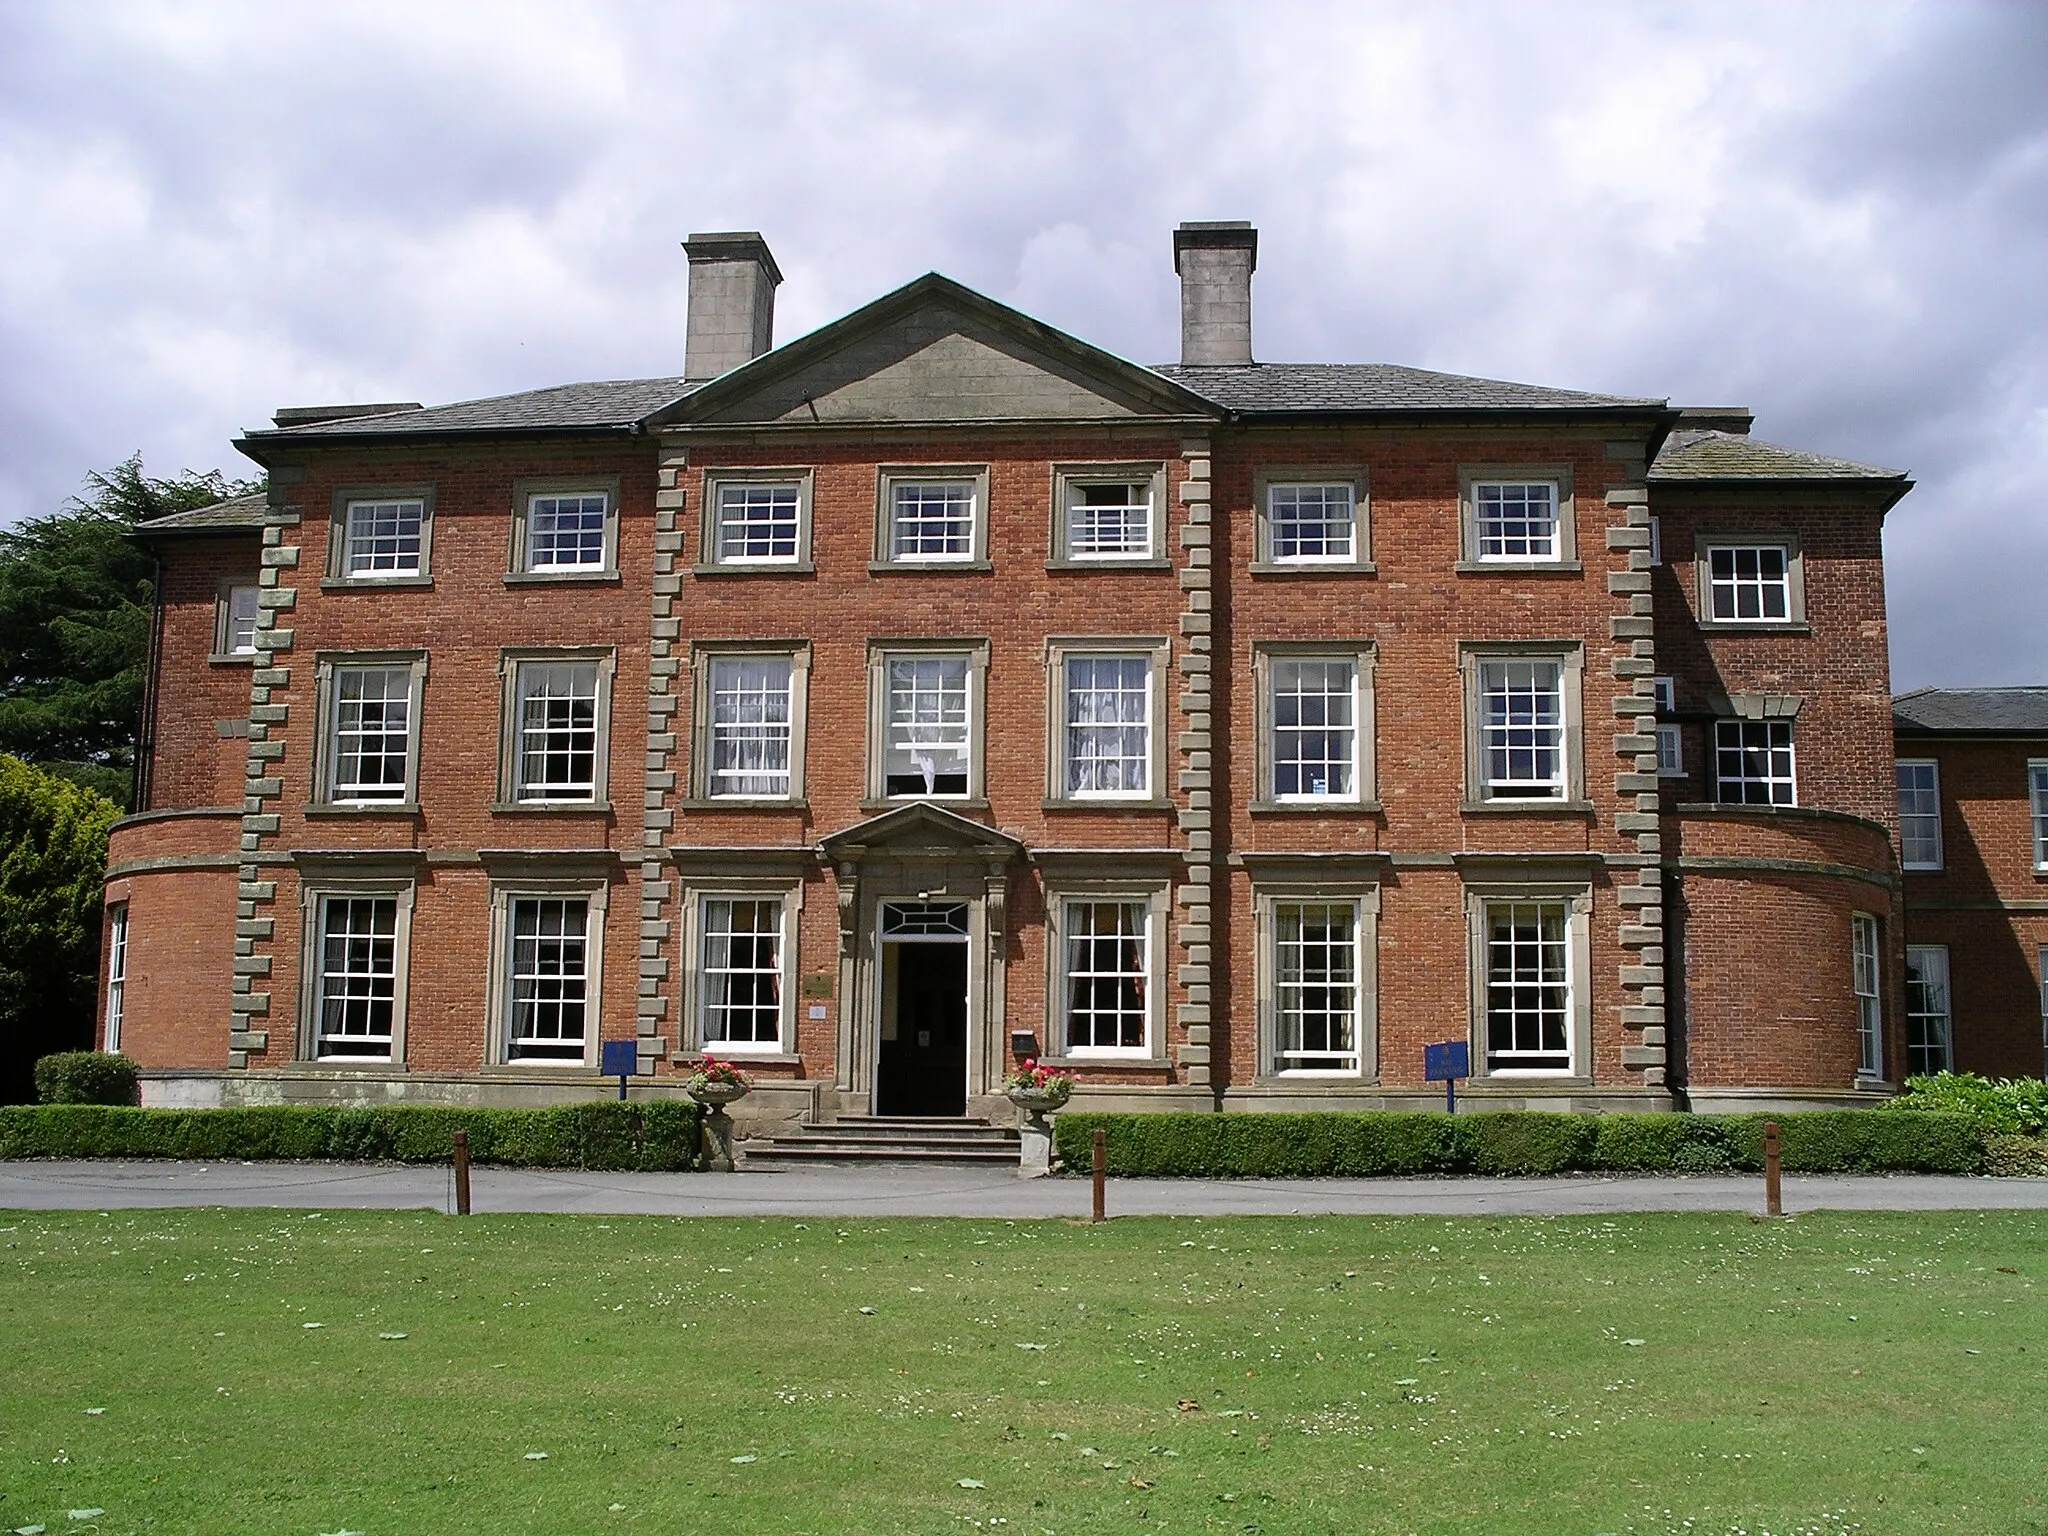 Photo showing: Ansty Hall, Ansty, Warwickshire, England. Front of building.